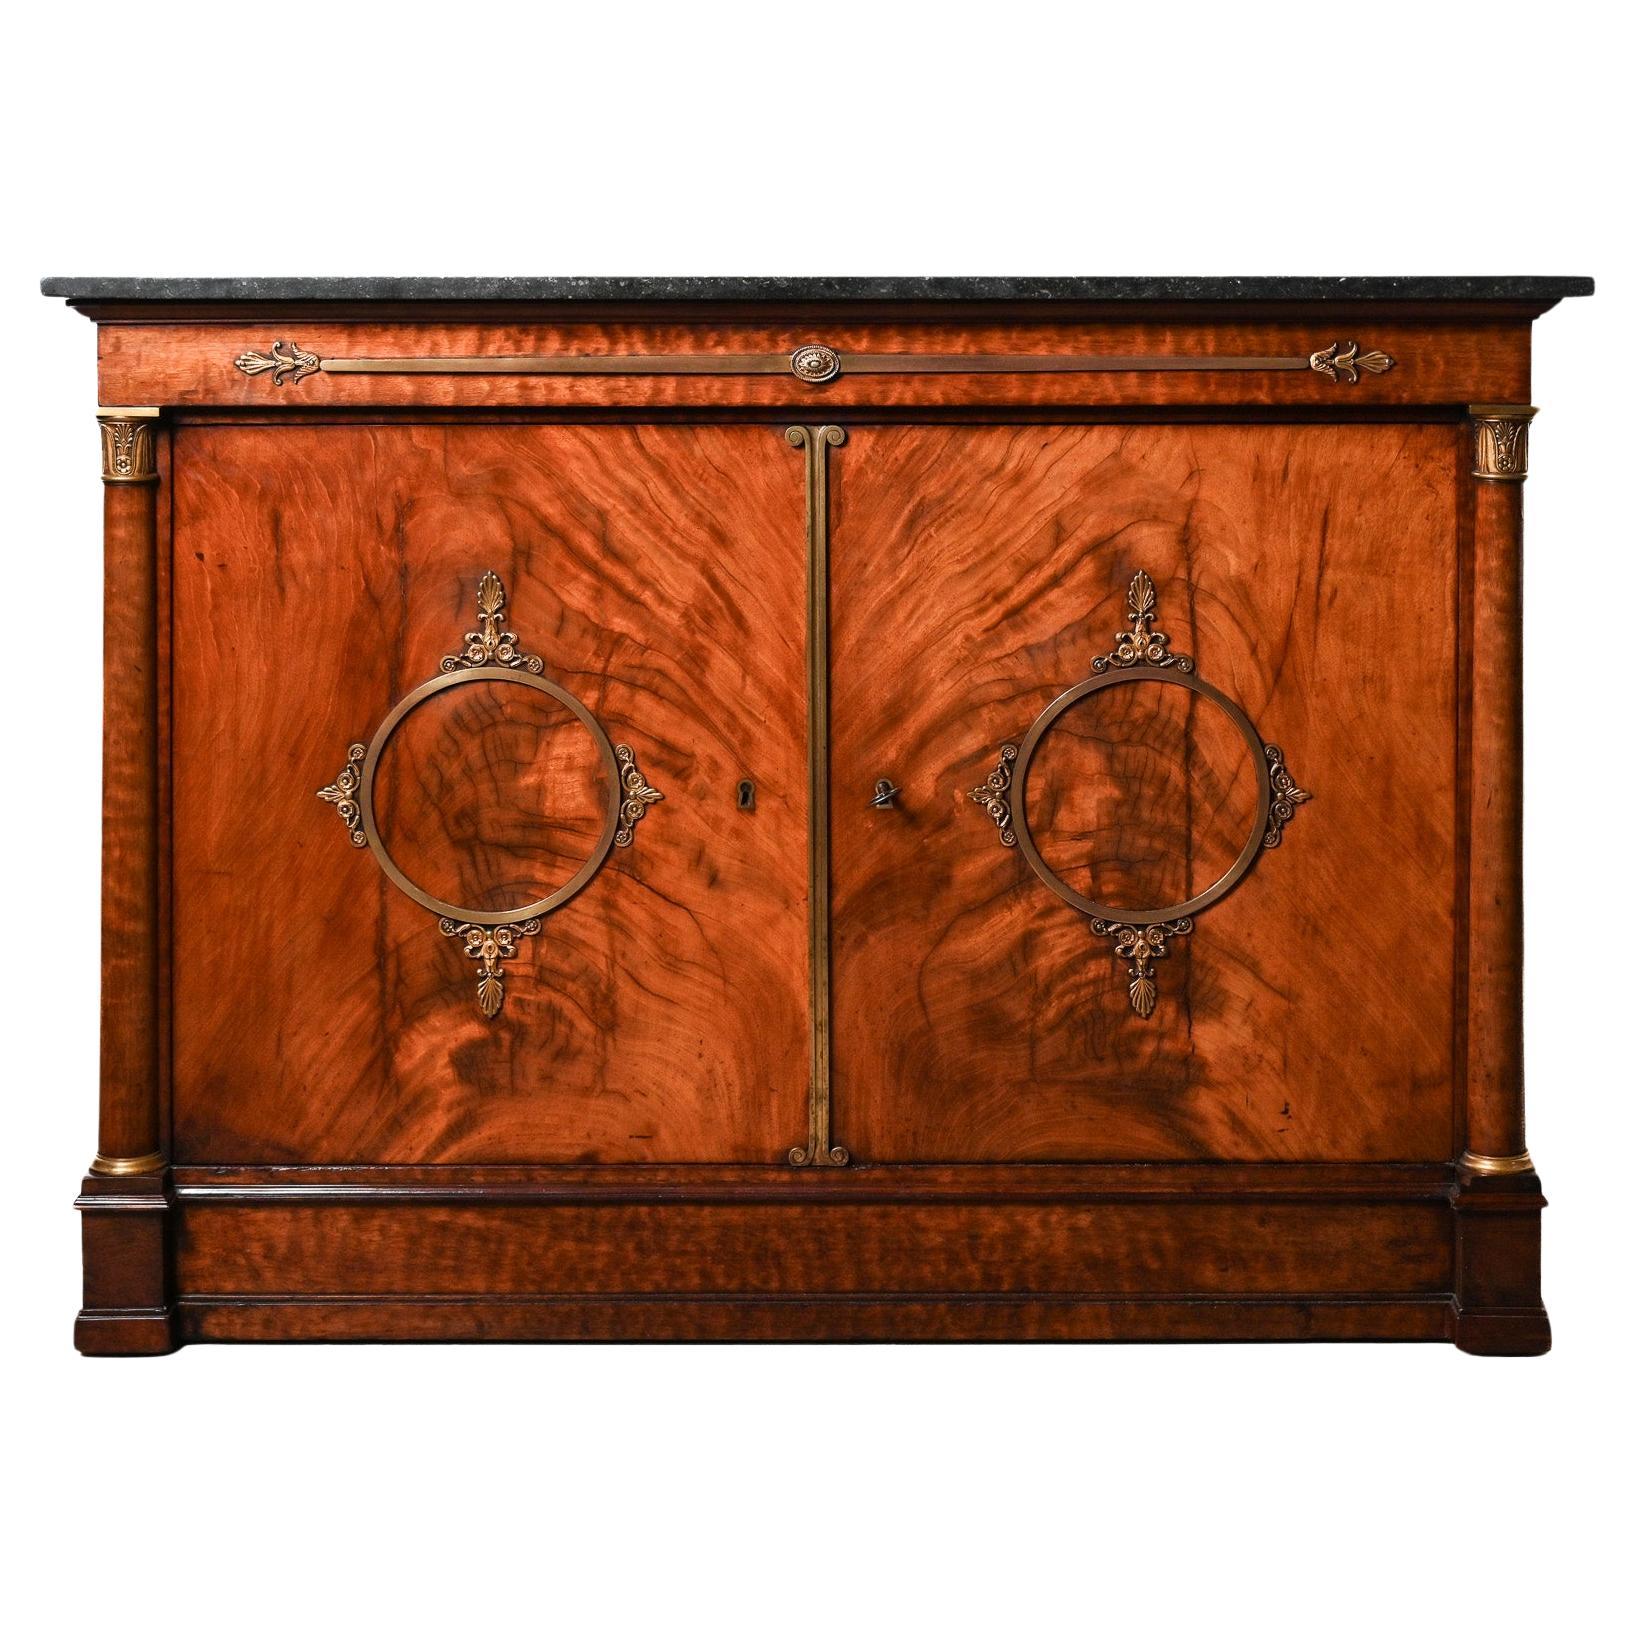 French Empire Jacob Desmalter et Cie mahogany two door commode with marble top For Sale